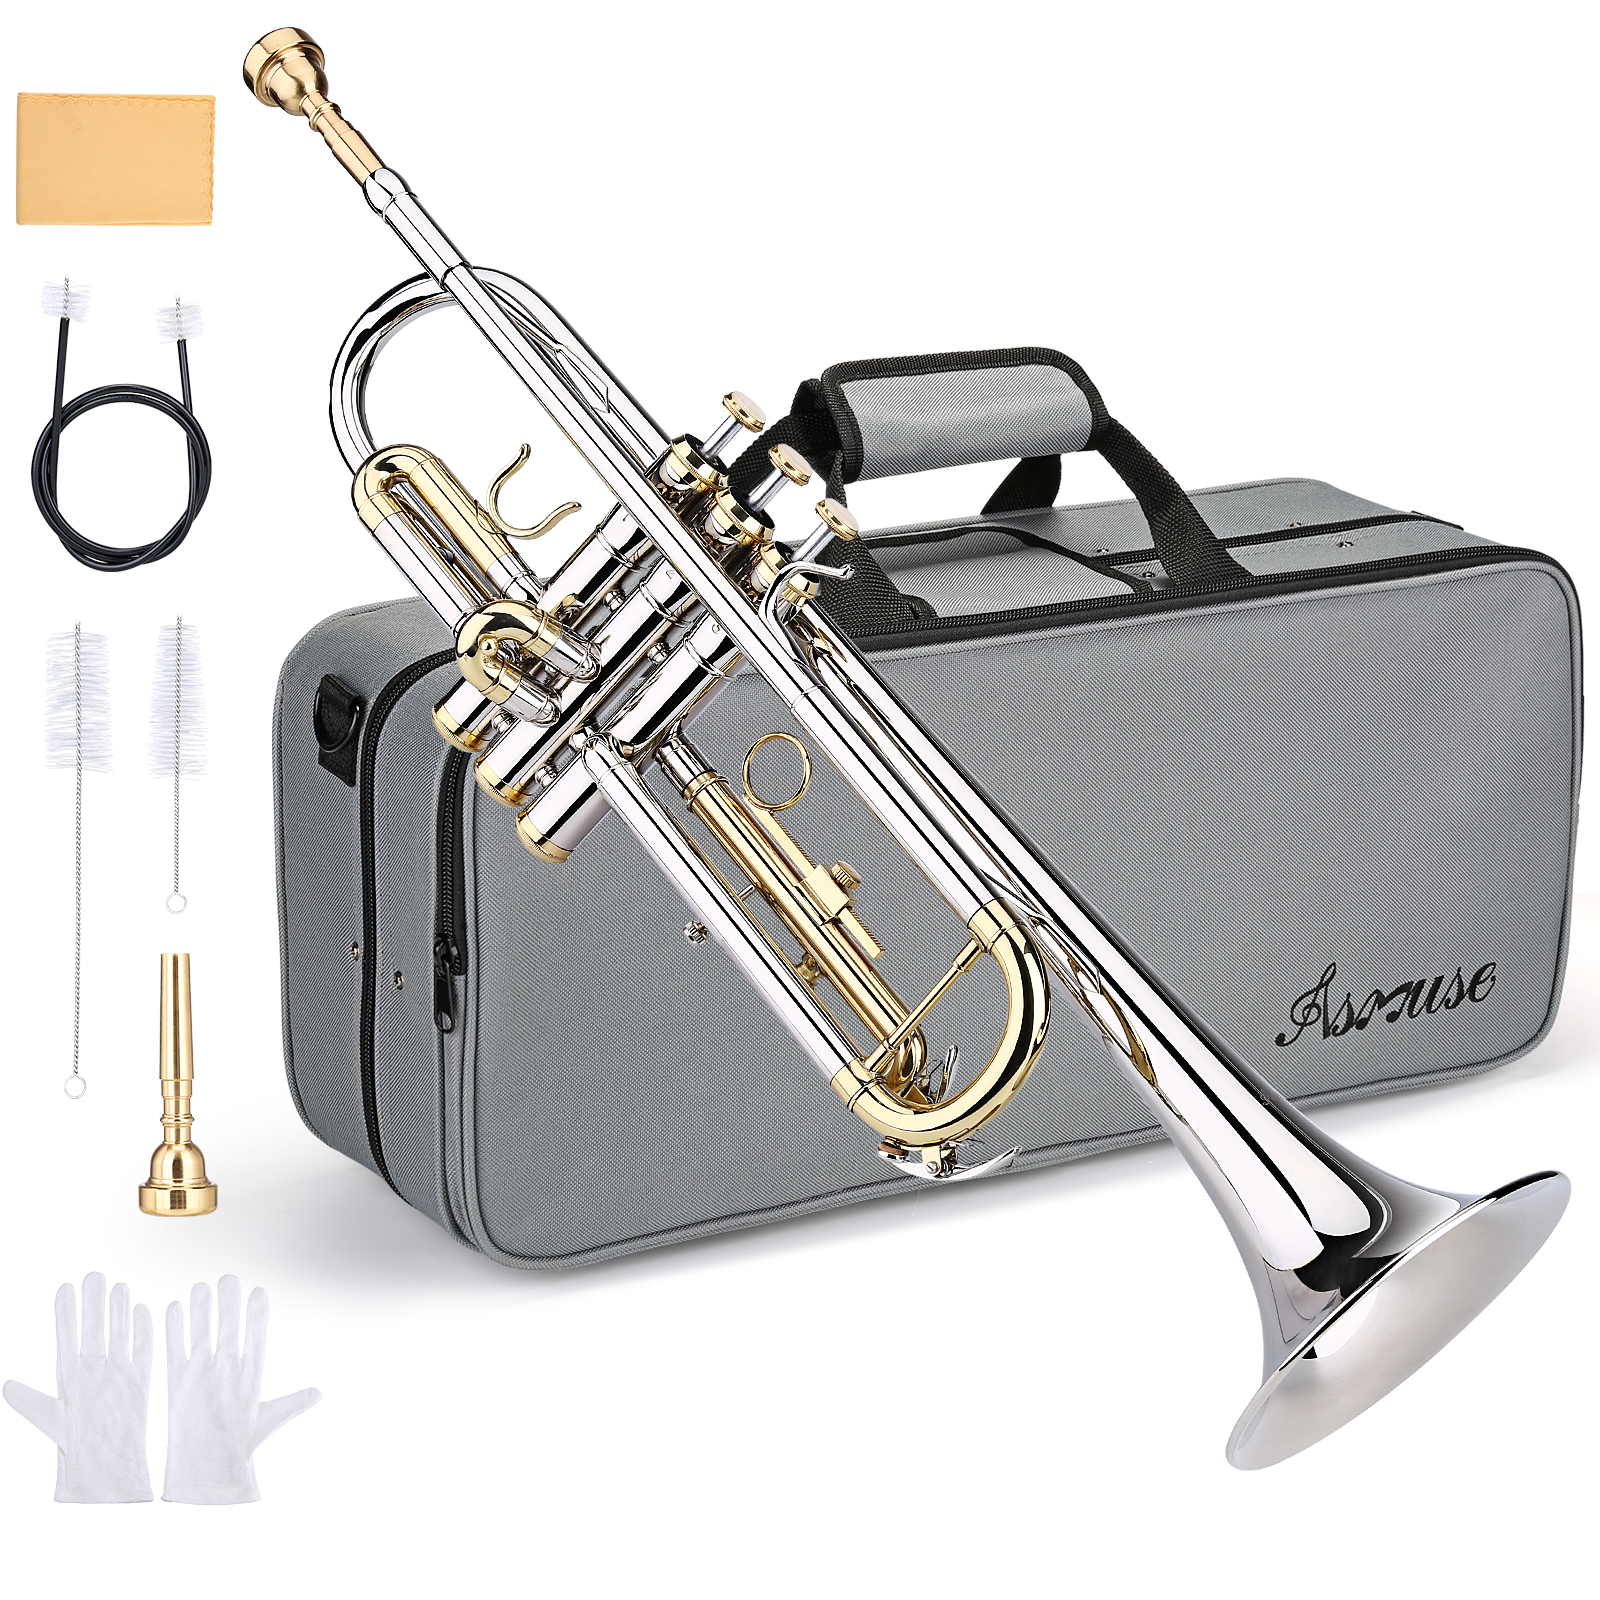 Color:Silver:2024 BB TRUMPET STUDENT BAND TRUMPETS BRASS INSTRUMENT WITH CASE BEGINNER